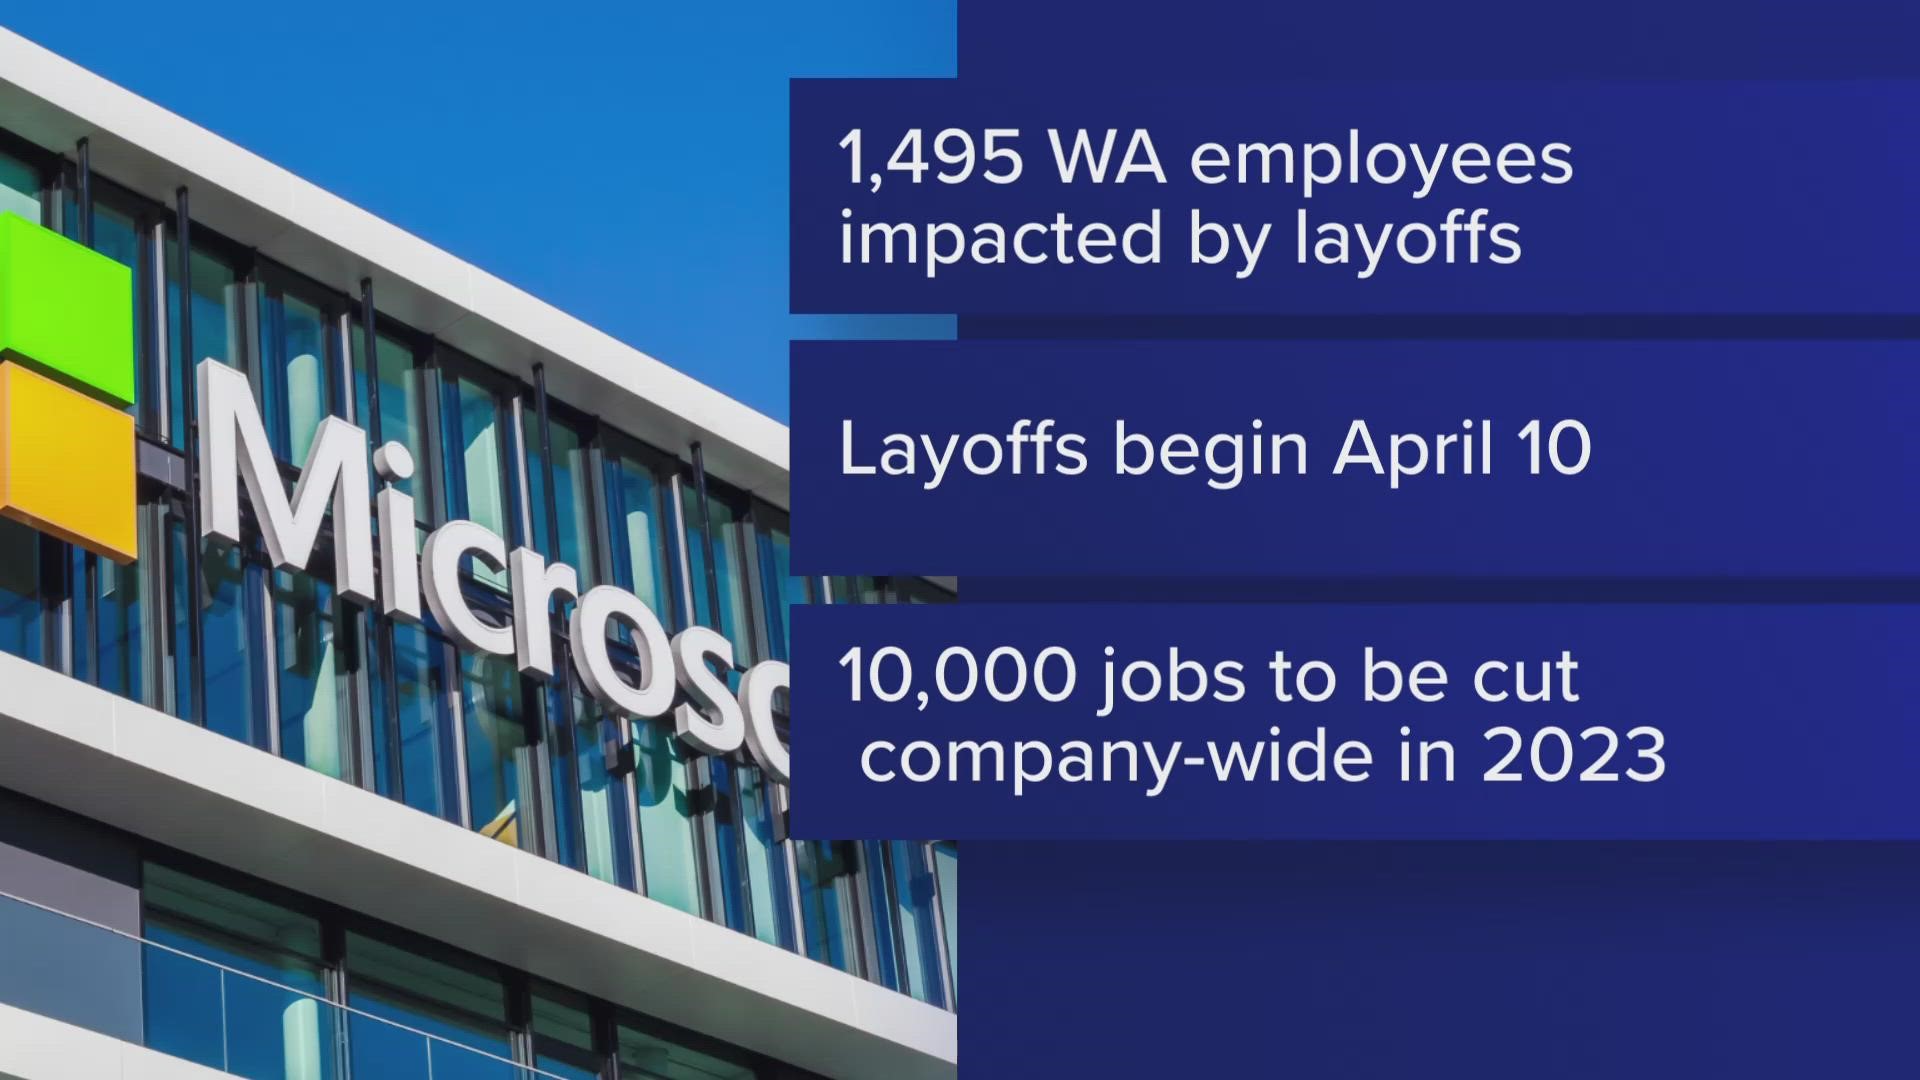 Microsoft announces another round of layoffs impacting Washington